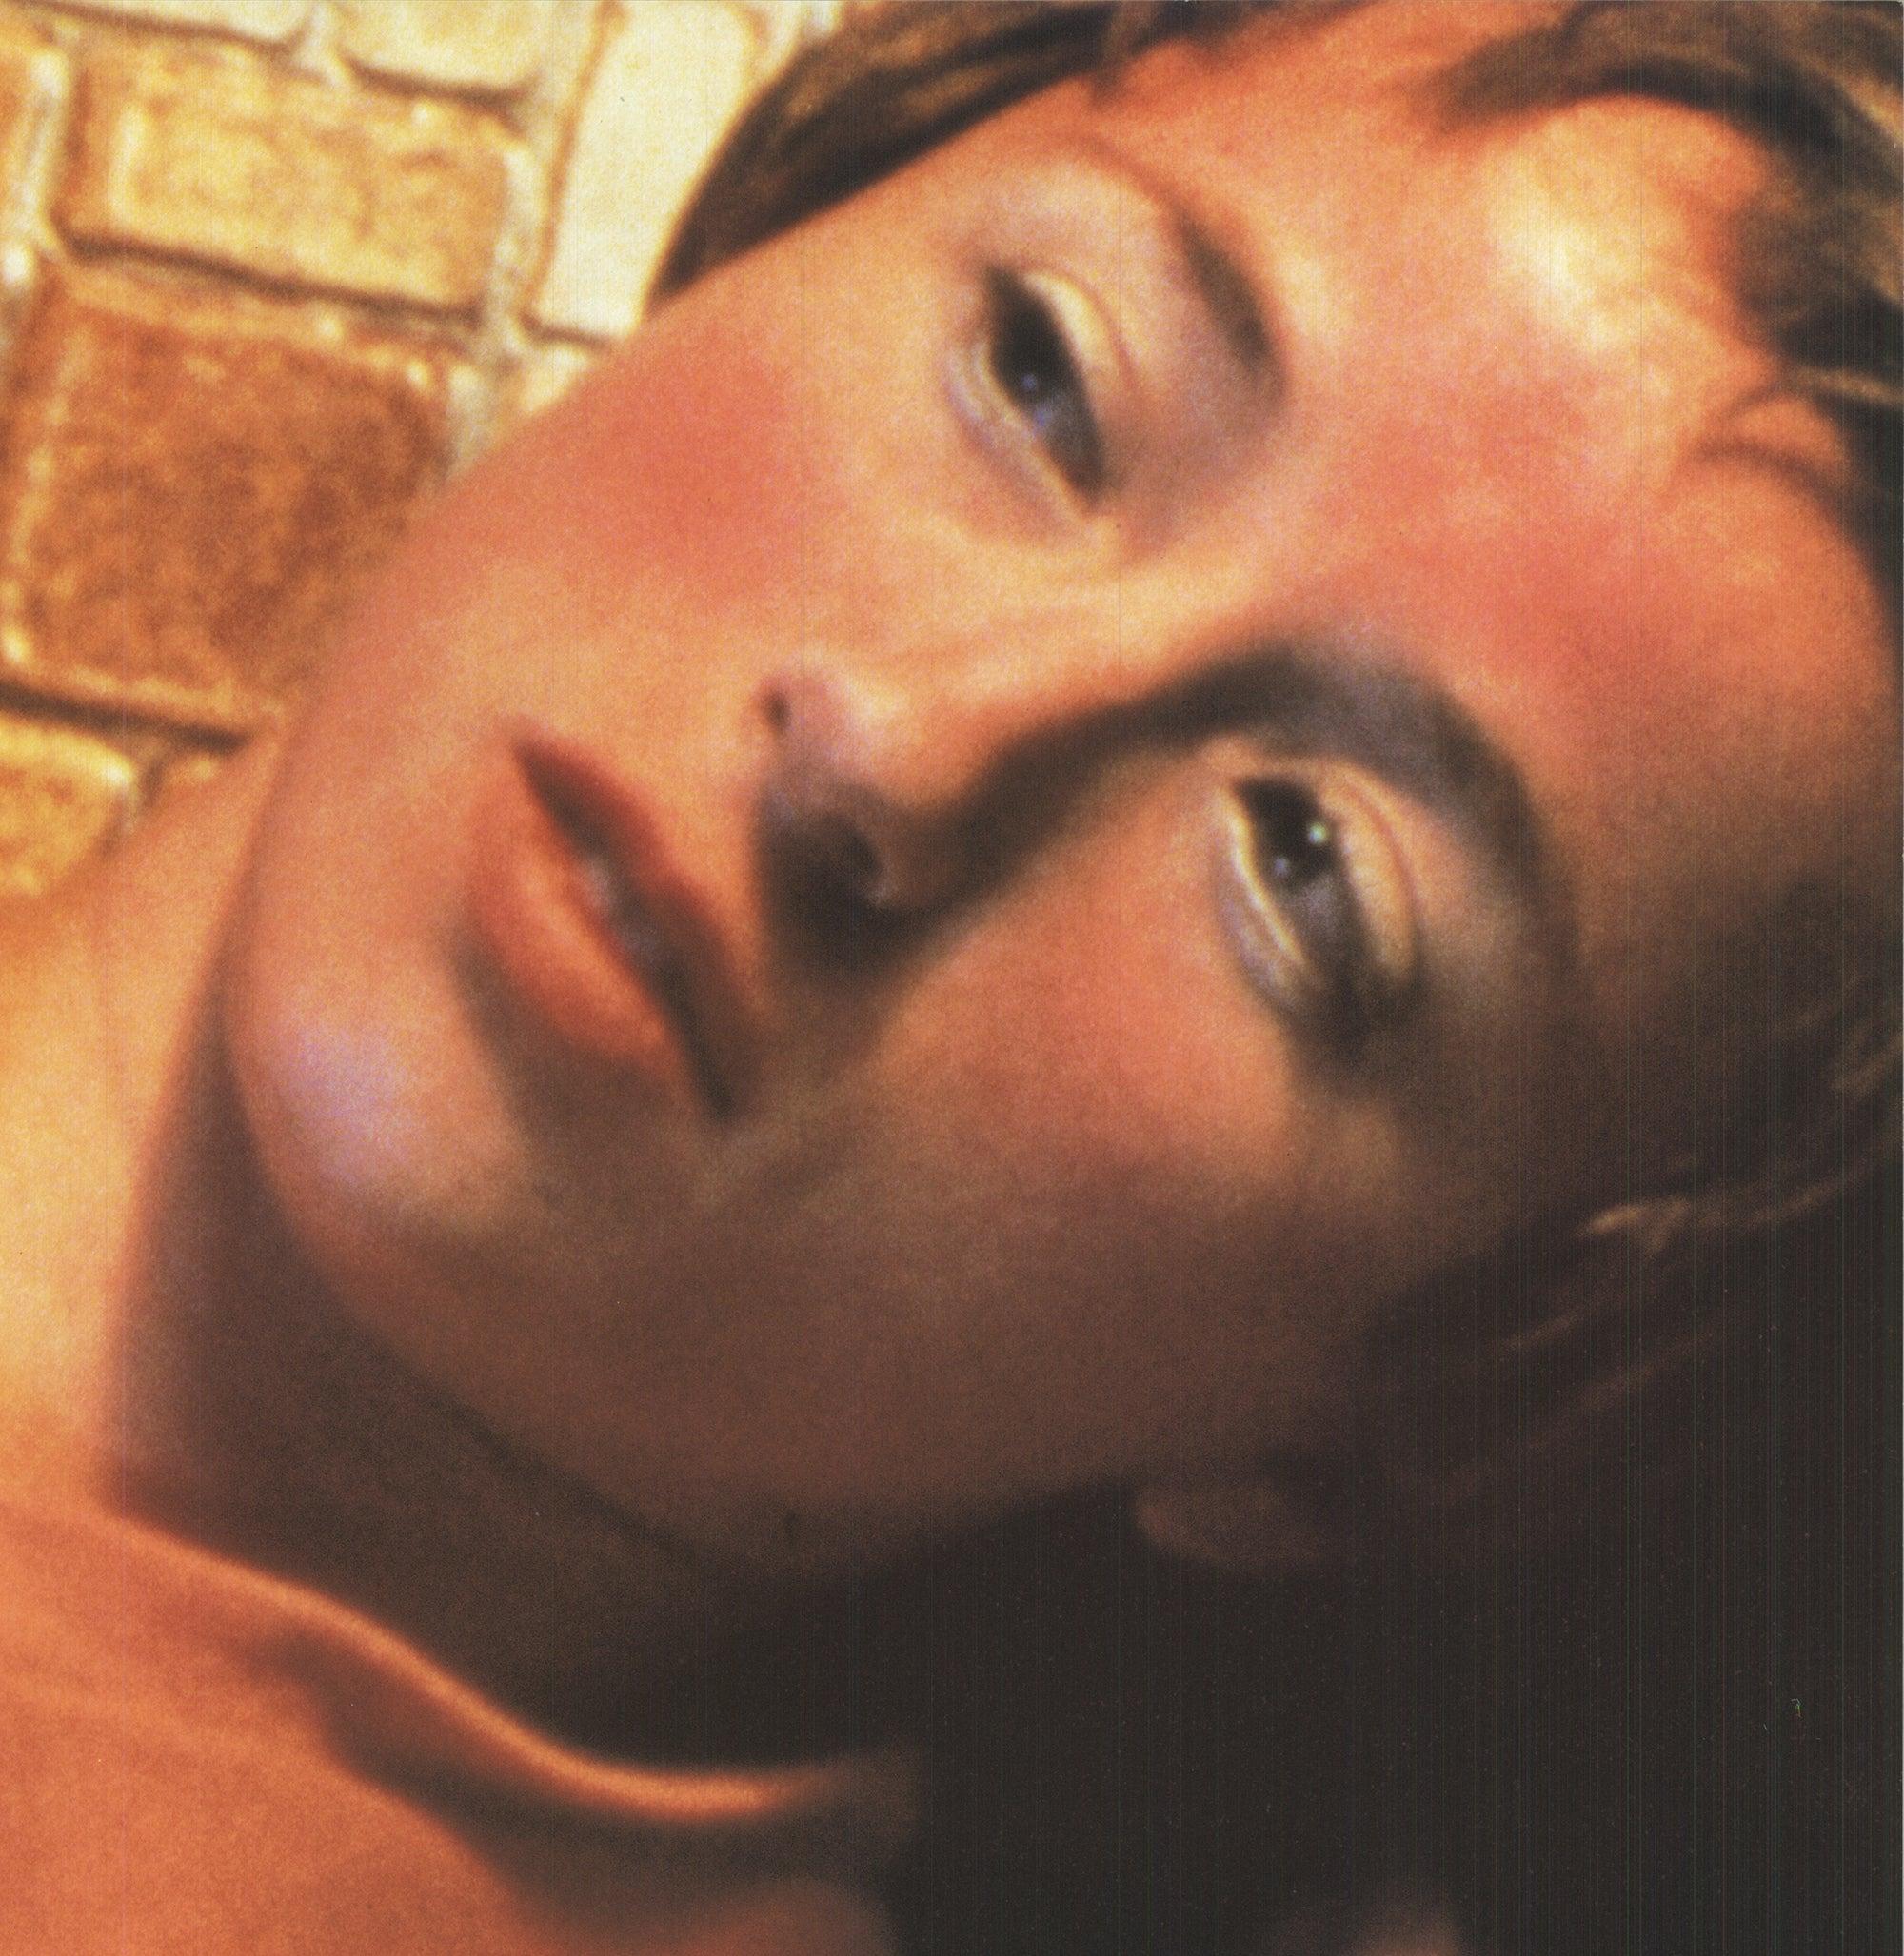 1994 Cindy Sherman 'Possession' First Edition For Sale 1